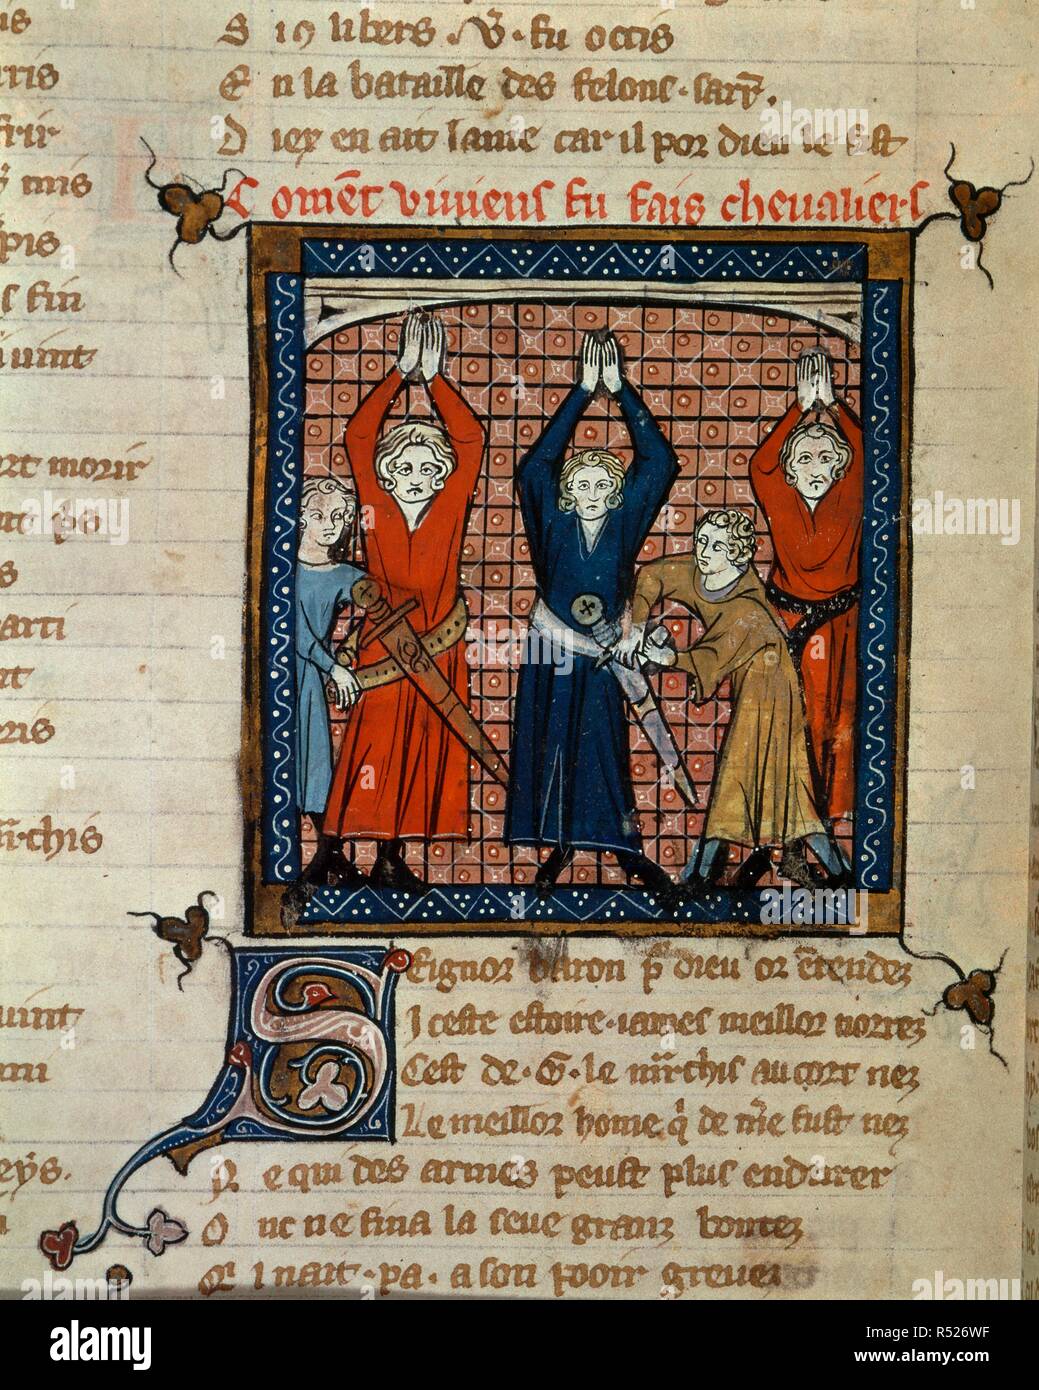 Vivian and others take oath. Chansons of Guillaume d'Orange. France; first half of 14th century. [Miniature and text] Vivian and two others being girt with the sword of knighthood, their hands uplifted to take the oath. Text beginning with decorated initial 'S'  Image taken from Chansons of Guillaume d'Orange.  Originally published/produced in France; first half of 14th century. . Source: Royal 20 D. XI, f.134v. Language: French. Stock Photo